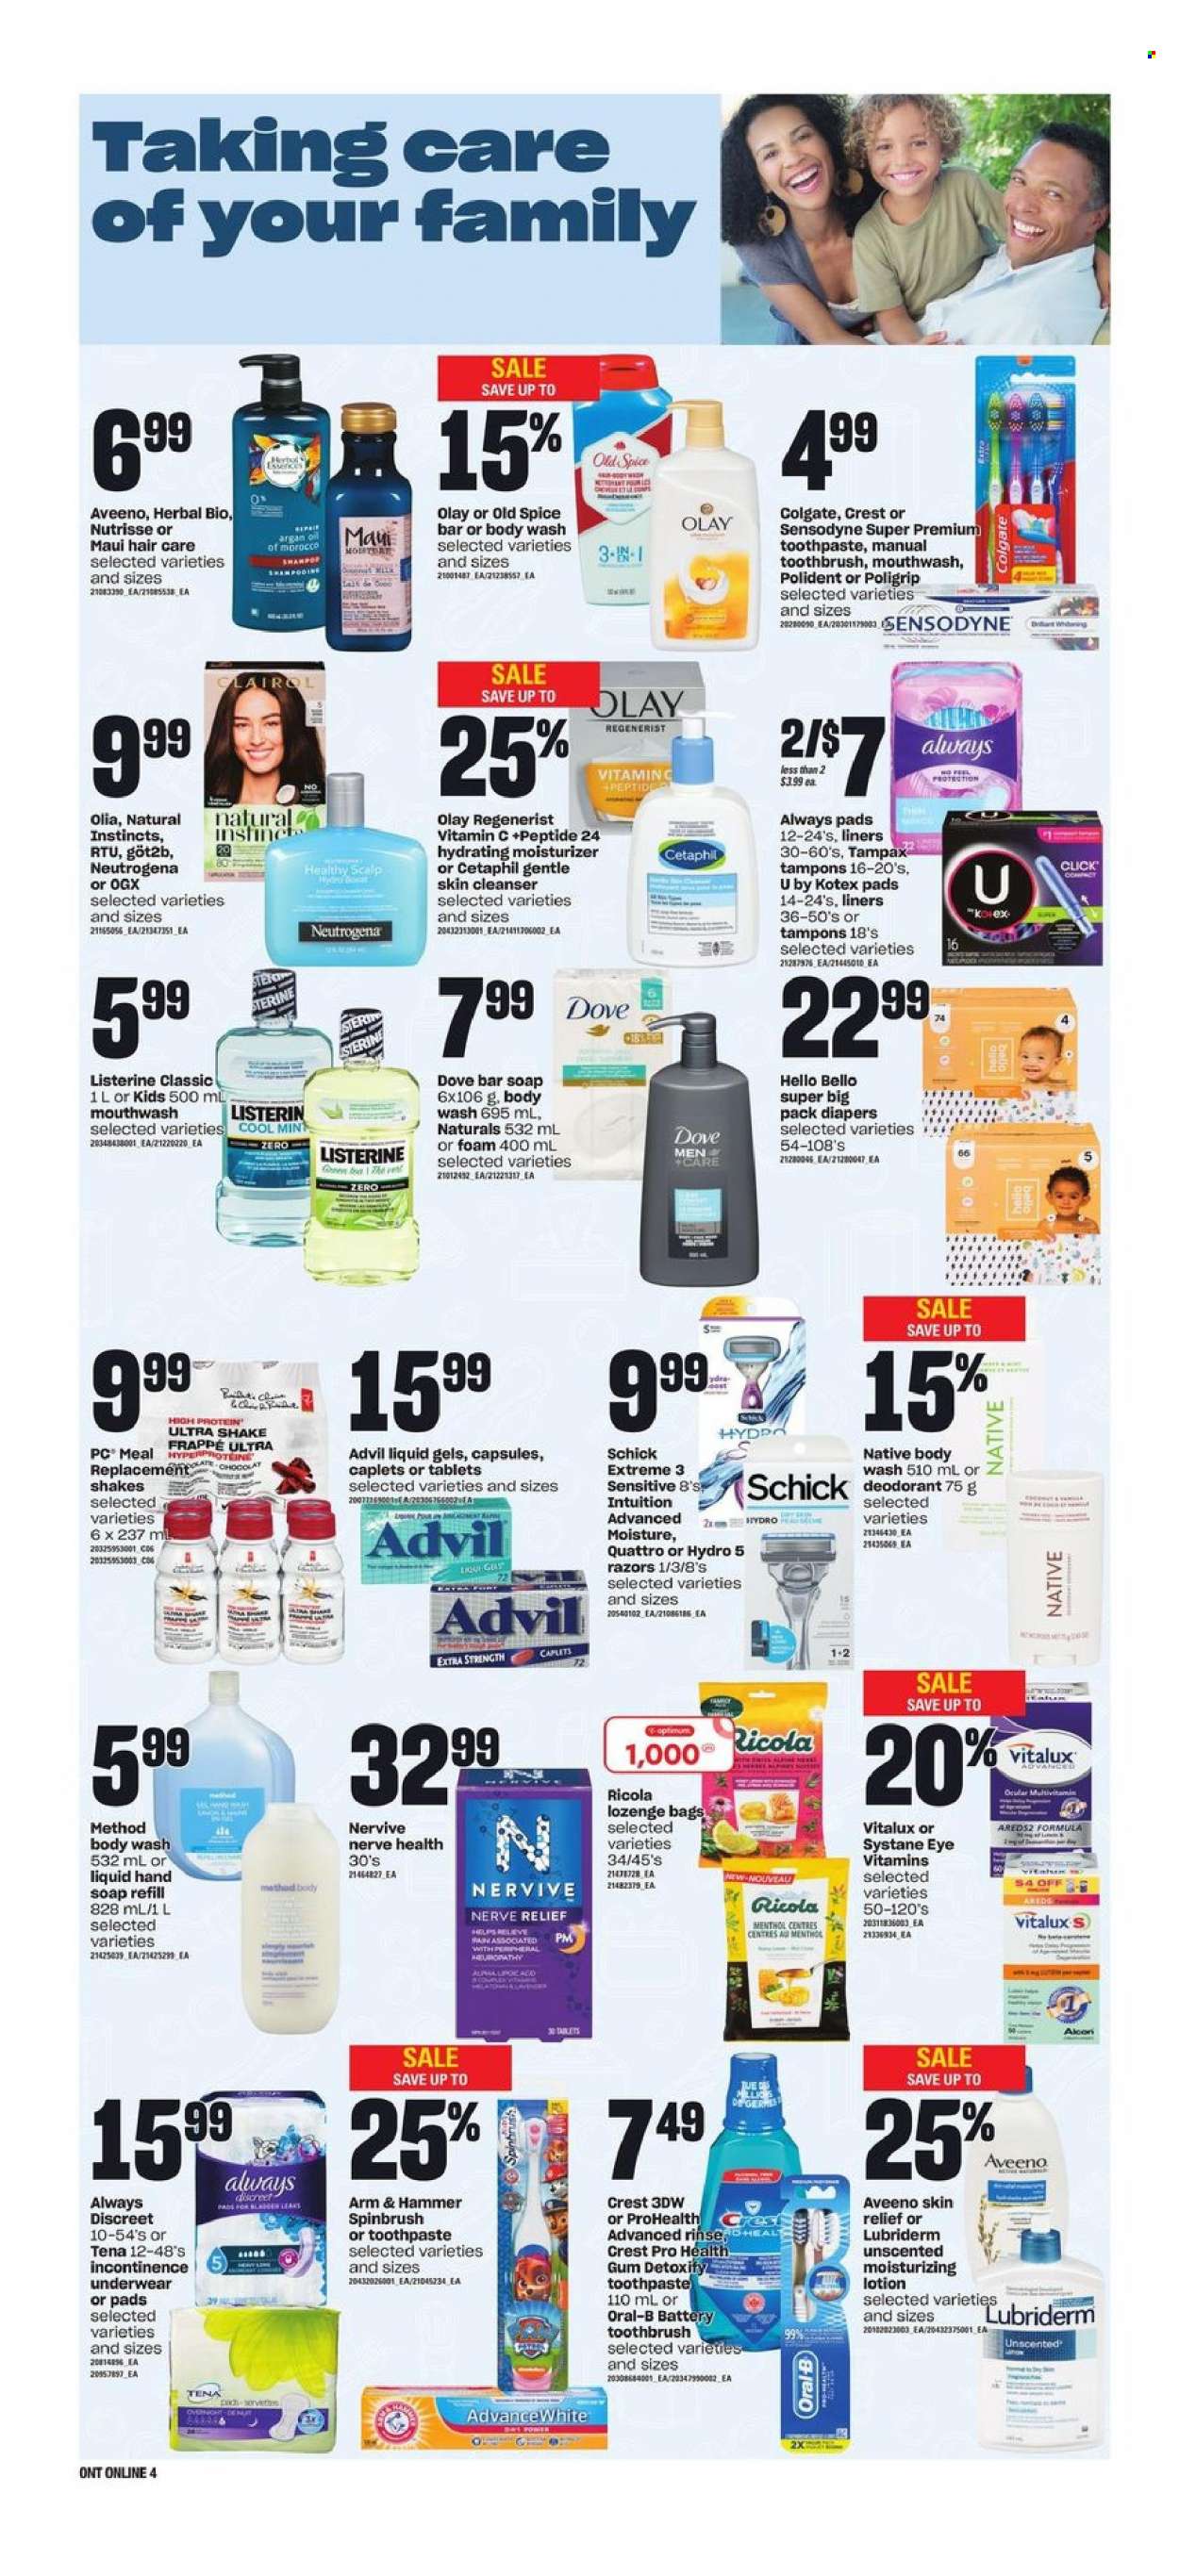 thumbnail - Independent Flyer - February 02, 2023 - February 08, 2023 - Sales products - shake, Dove, Ricola, ARM & HAMMER, spice, nappies, Aveeno, body wash, hand soap, soap bar, soap, toothbrush, toothpaste, mouthwash, Polident, Crest, Always pads, sanitary pads, Always Discreet, Kotex, Kotex pads, incontinence underwear, tampons, cleanser, moisturizer, Olay, OGX, Clairol, body lotion, Lubriderm, anti-perspirant, Schick, bag, pot, Optimum, multivitamin, vitamin c, argan oil, Advil Rapid, Colgate, Listerine, Neutrogena, shampoo, Systane, Tampax, Old Spice, Oral-B, Sensodyne, deodorant. Page 10.